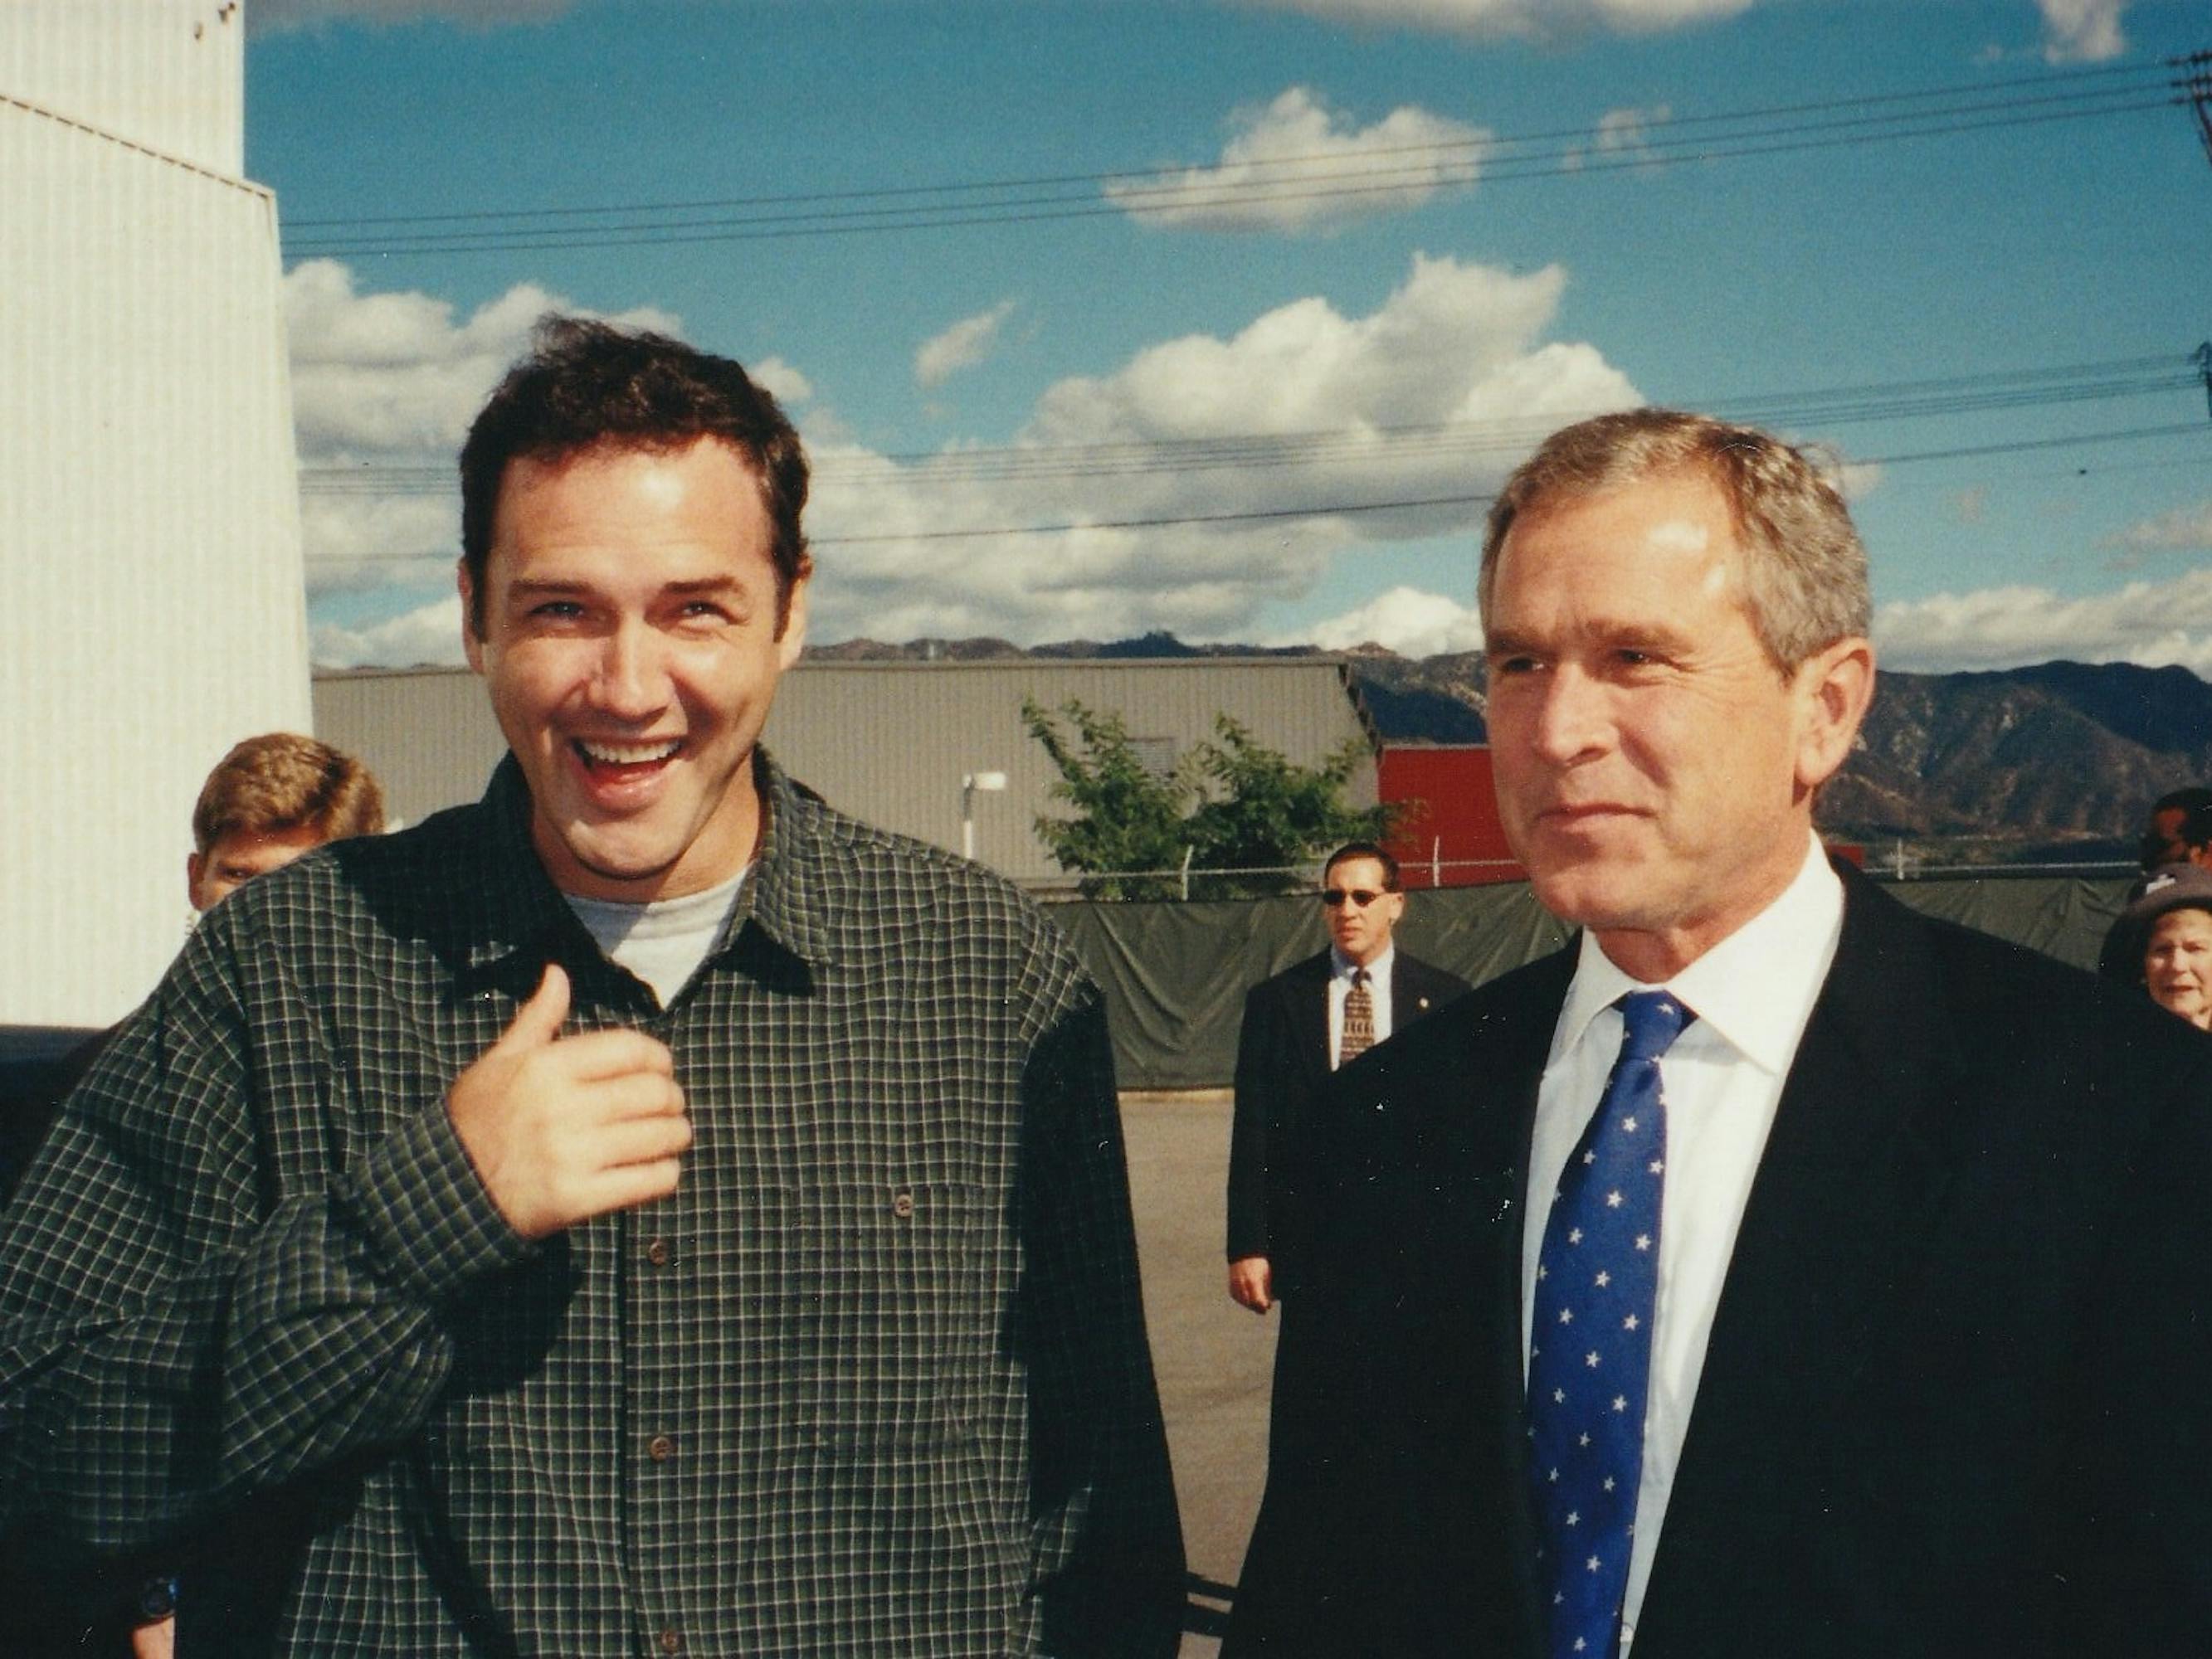 Norm Macdonald and George Bush stand together outside against a blue sky dotted with puffy clouds.